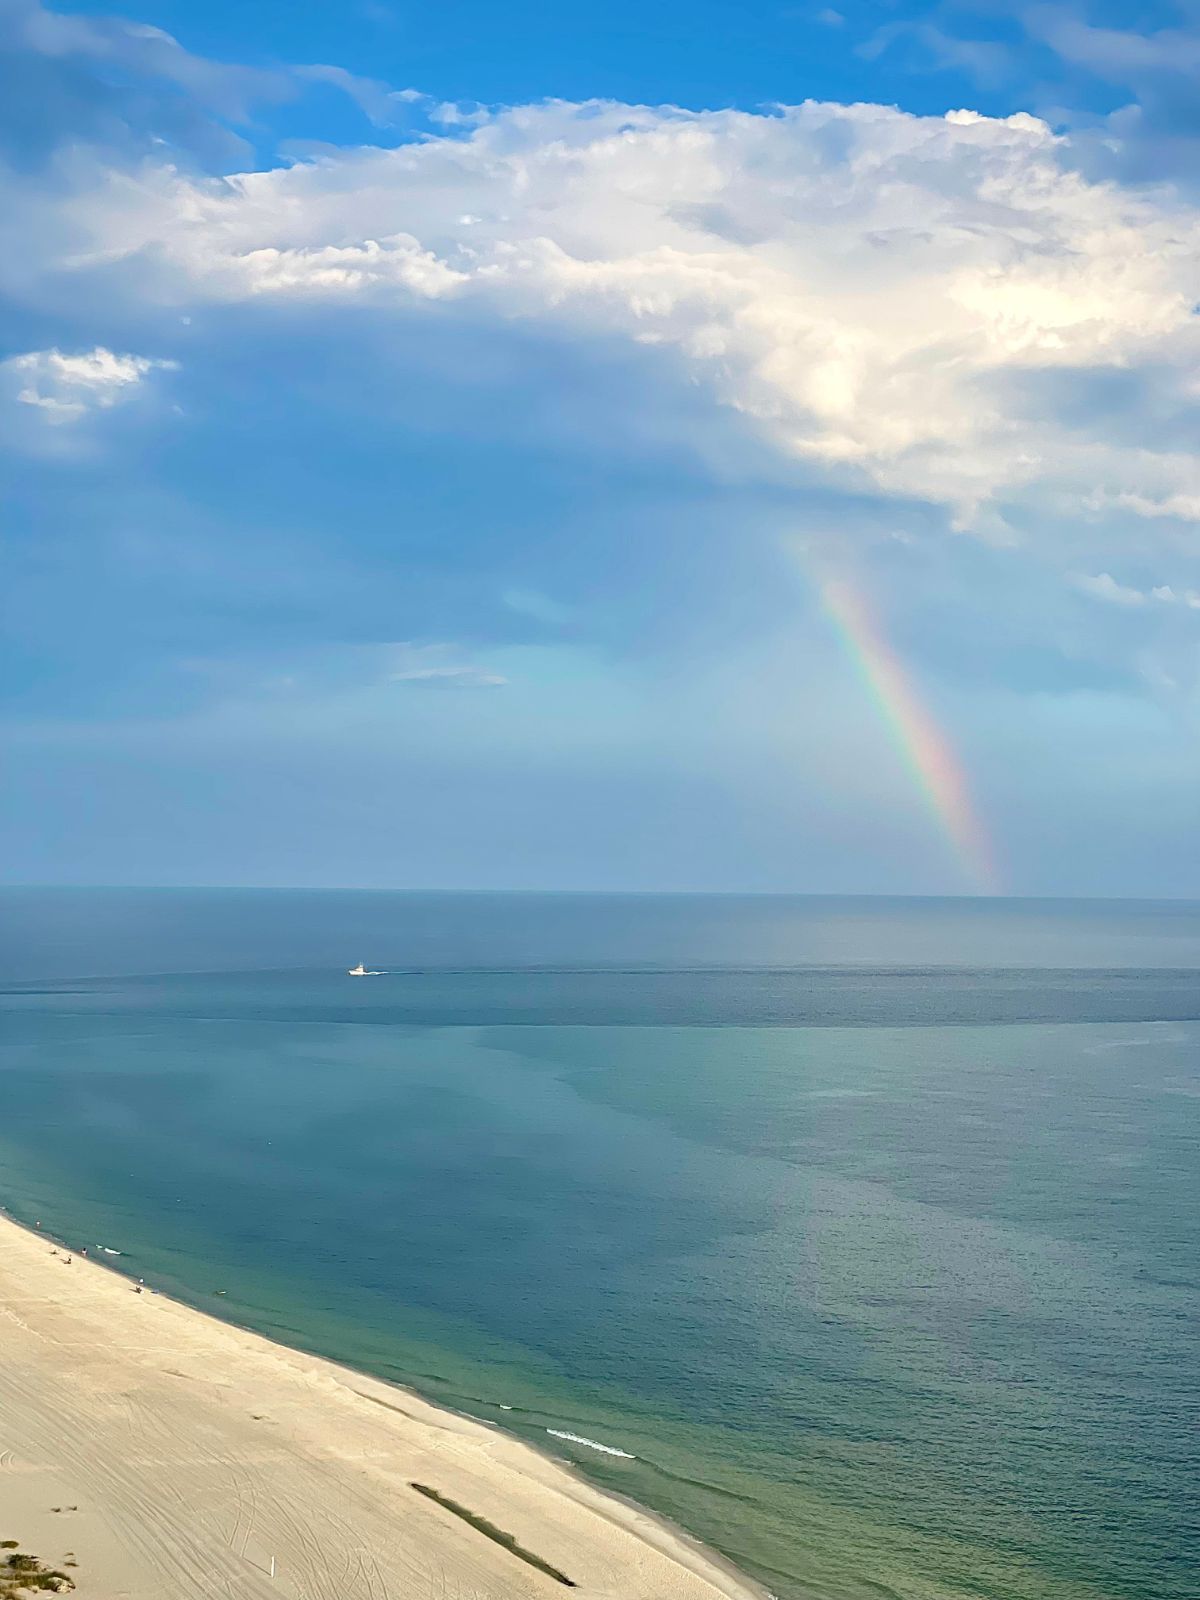 Rainbow over the ocean view from Turquoise Place balcony in Orange Beach Alabama.